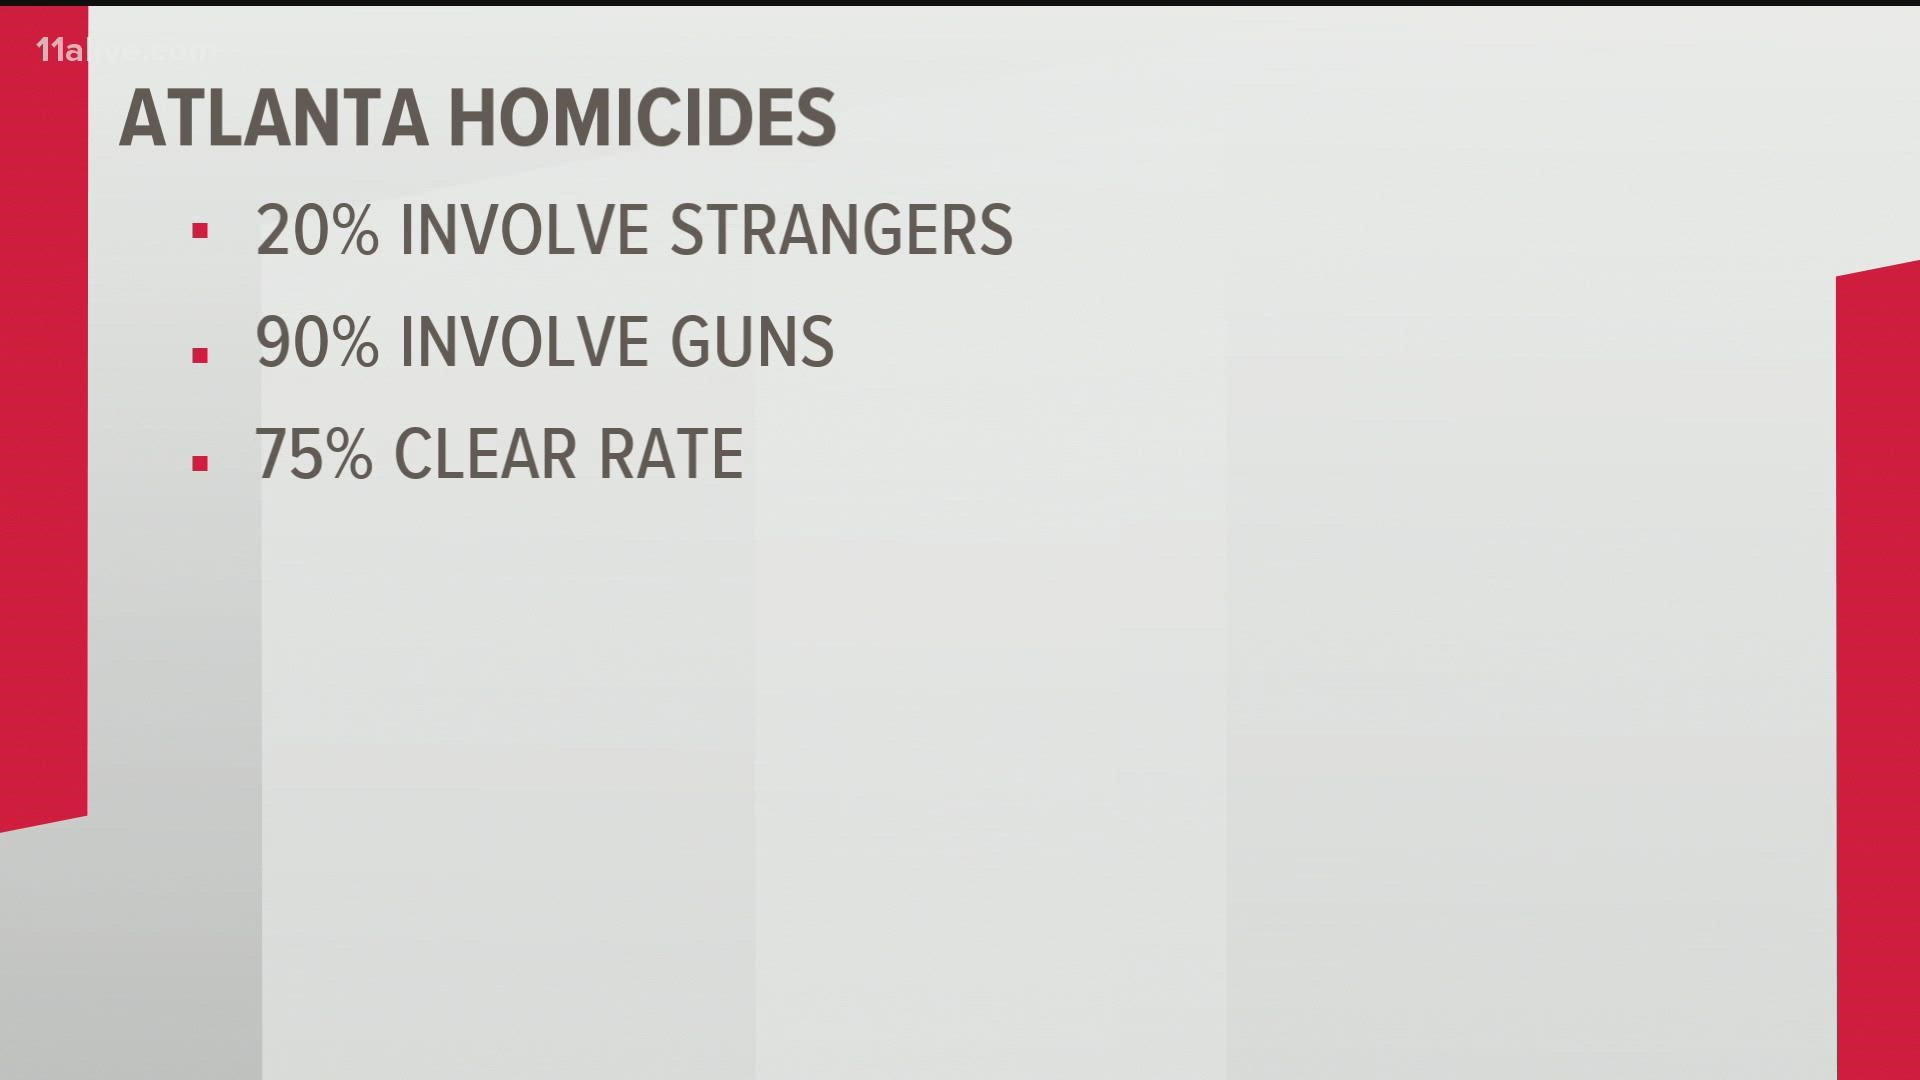 In a news conference at the Atlanta Police Headquarters on Monday, Deputy Chief Charles Hampton Jr. said about 20 percent of homicides happen between strangers.